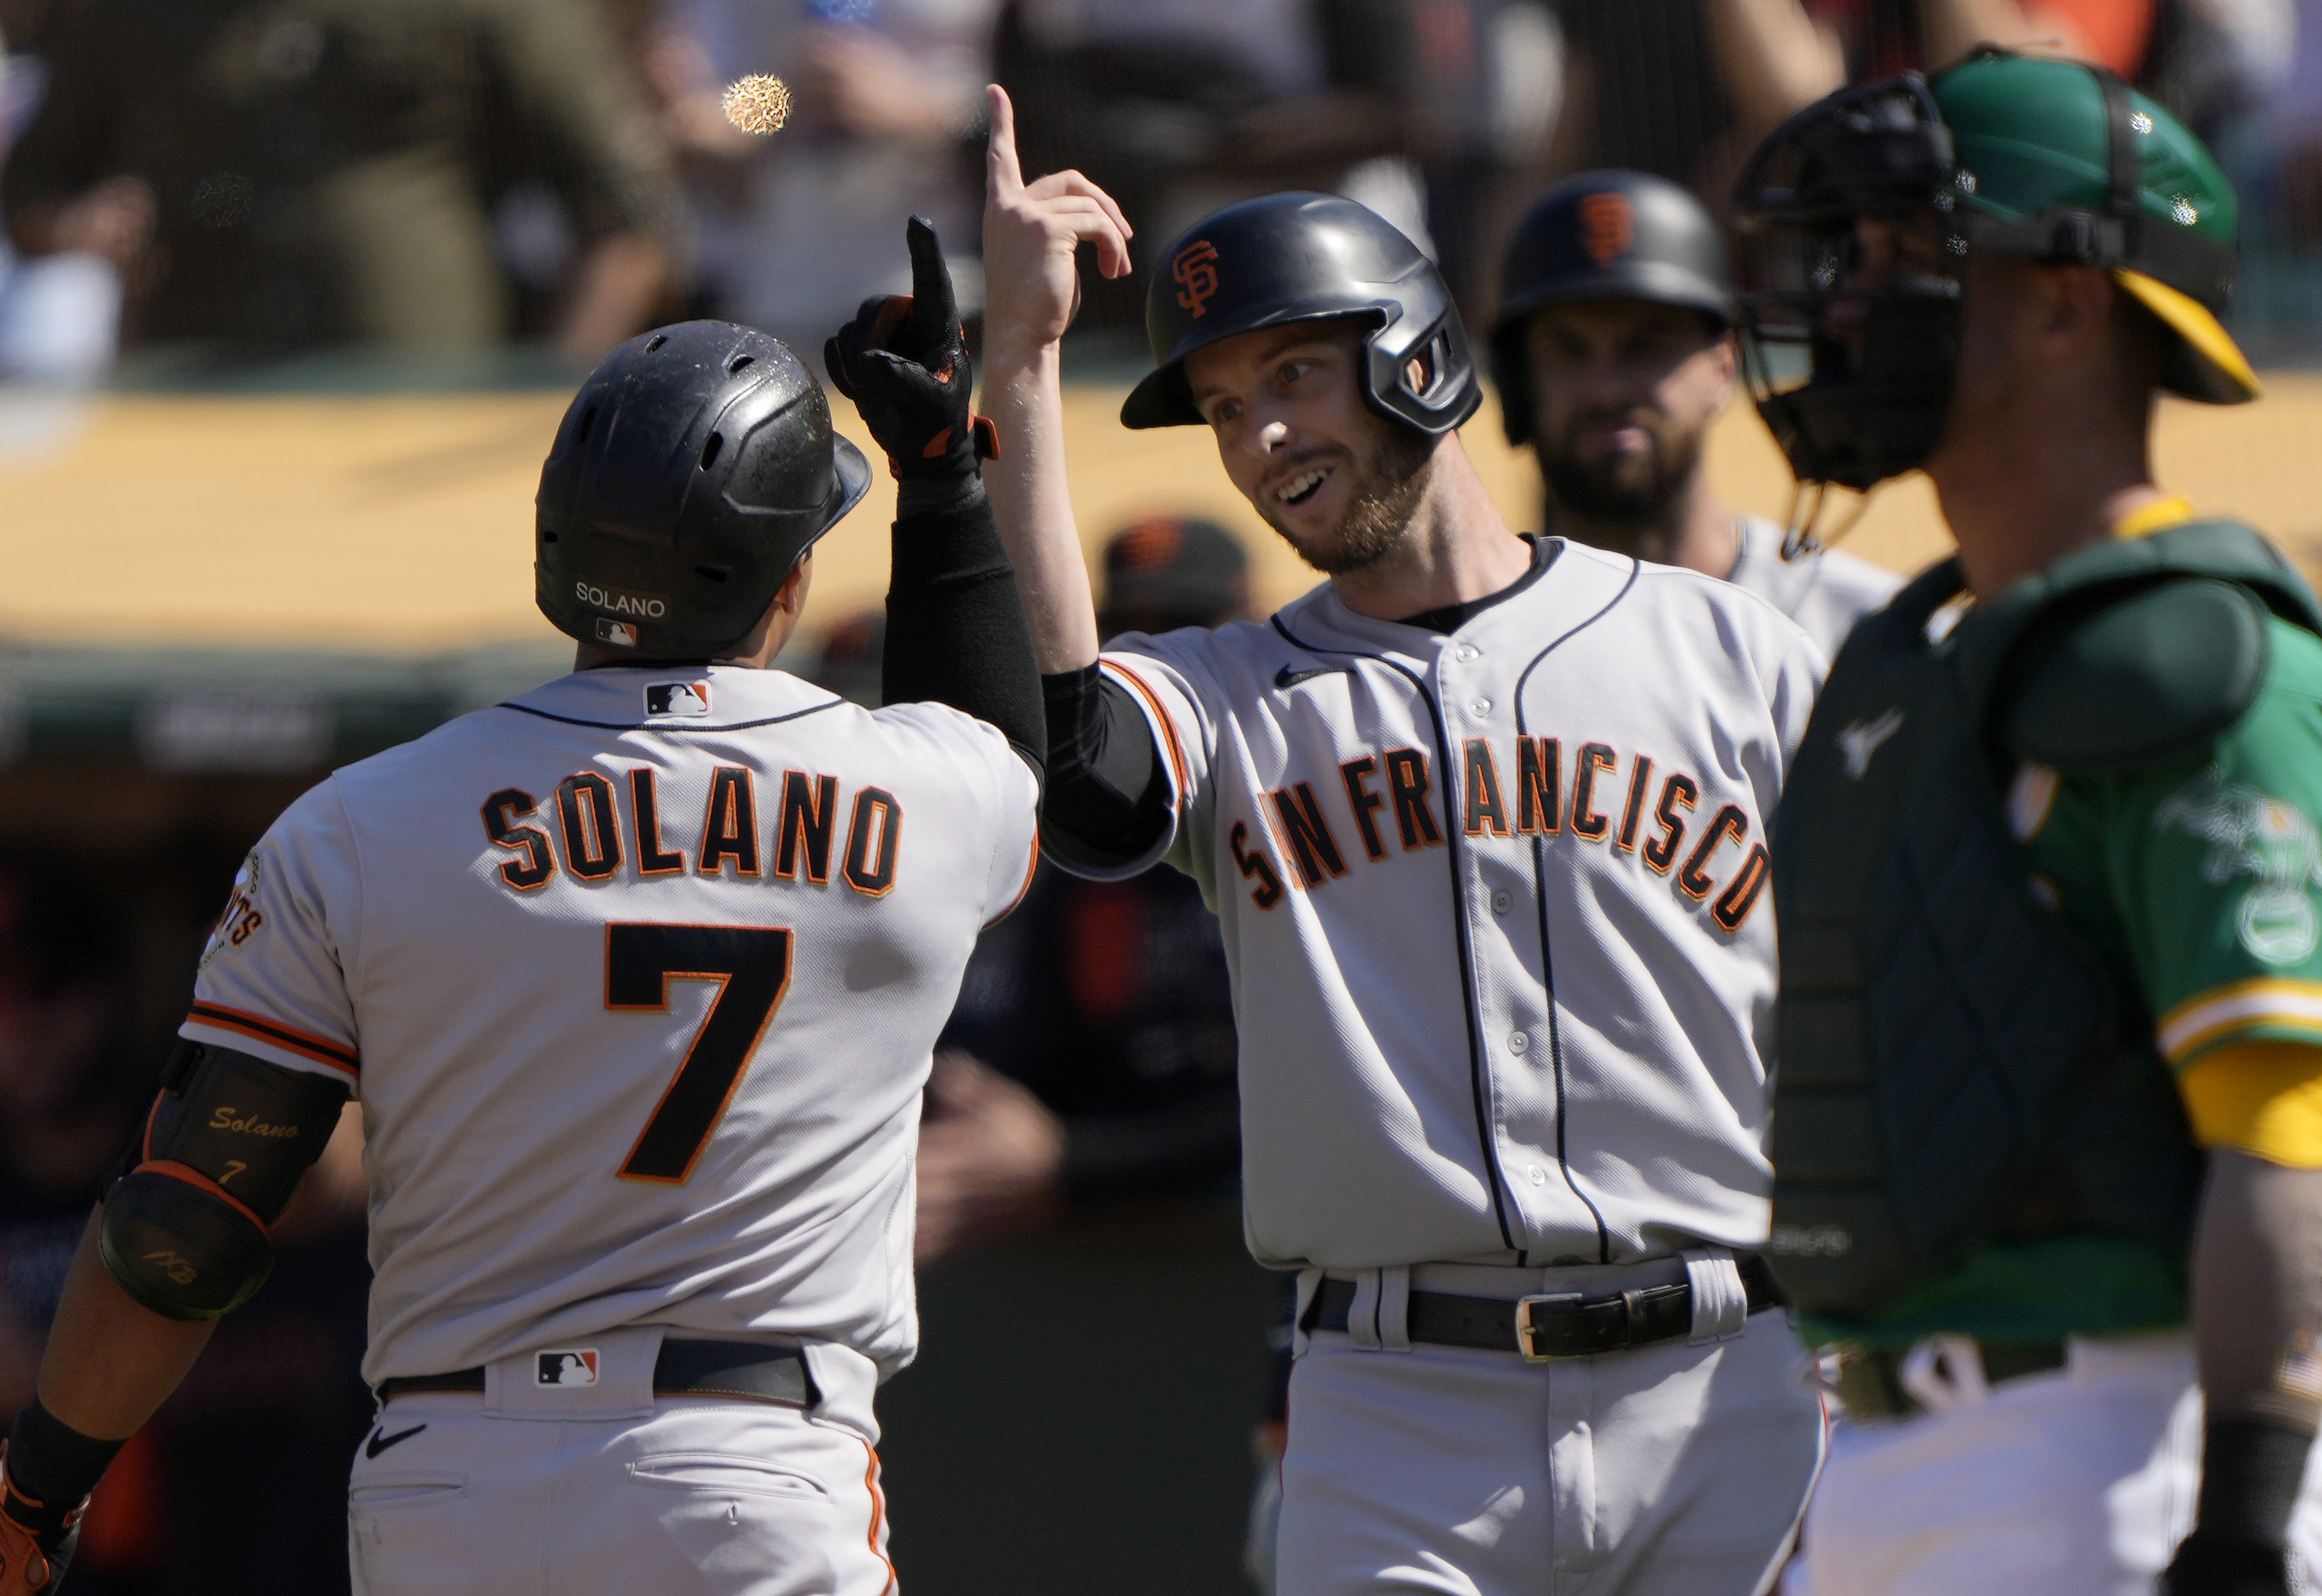 LaMonte Wade hits historic homer, but SF Giants lose to O's 3-2